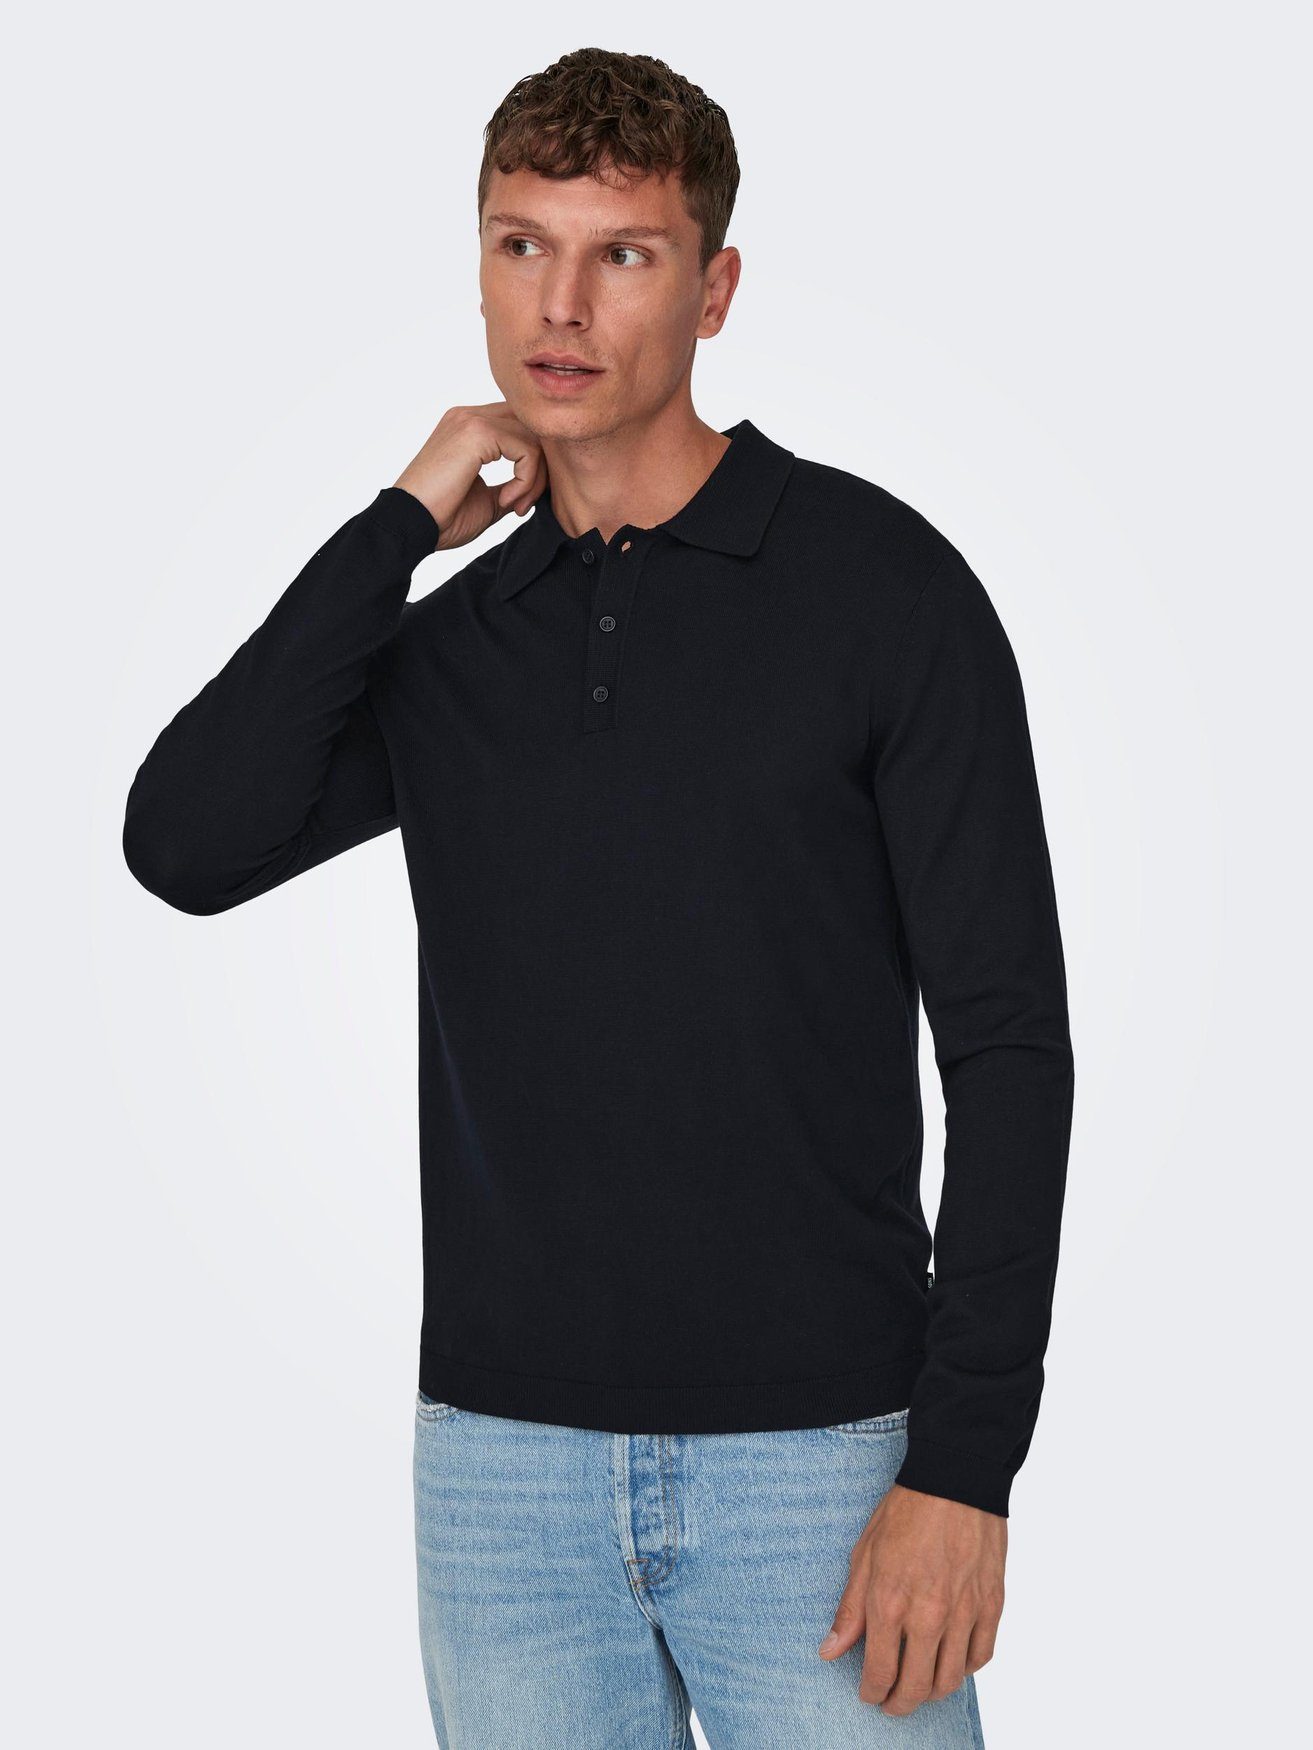 & 5426 Dunkelblau Basic Strickpullover in Pullover Shirt Langarm ONLY SONS ONSWYLER Polo